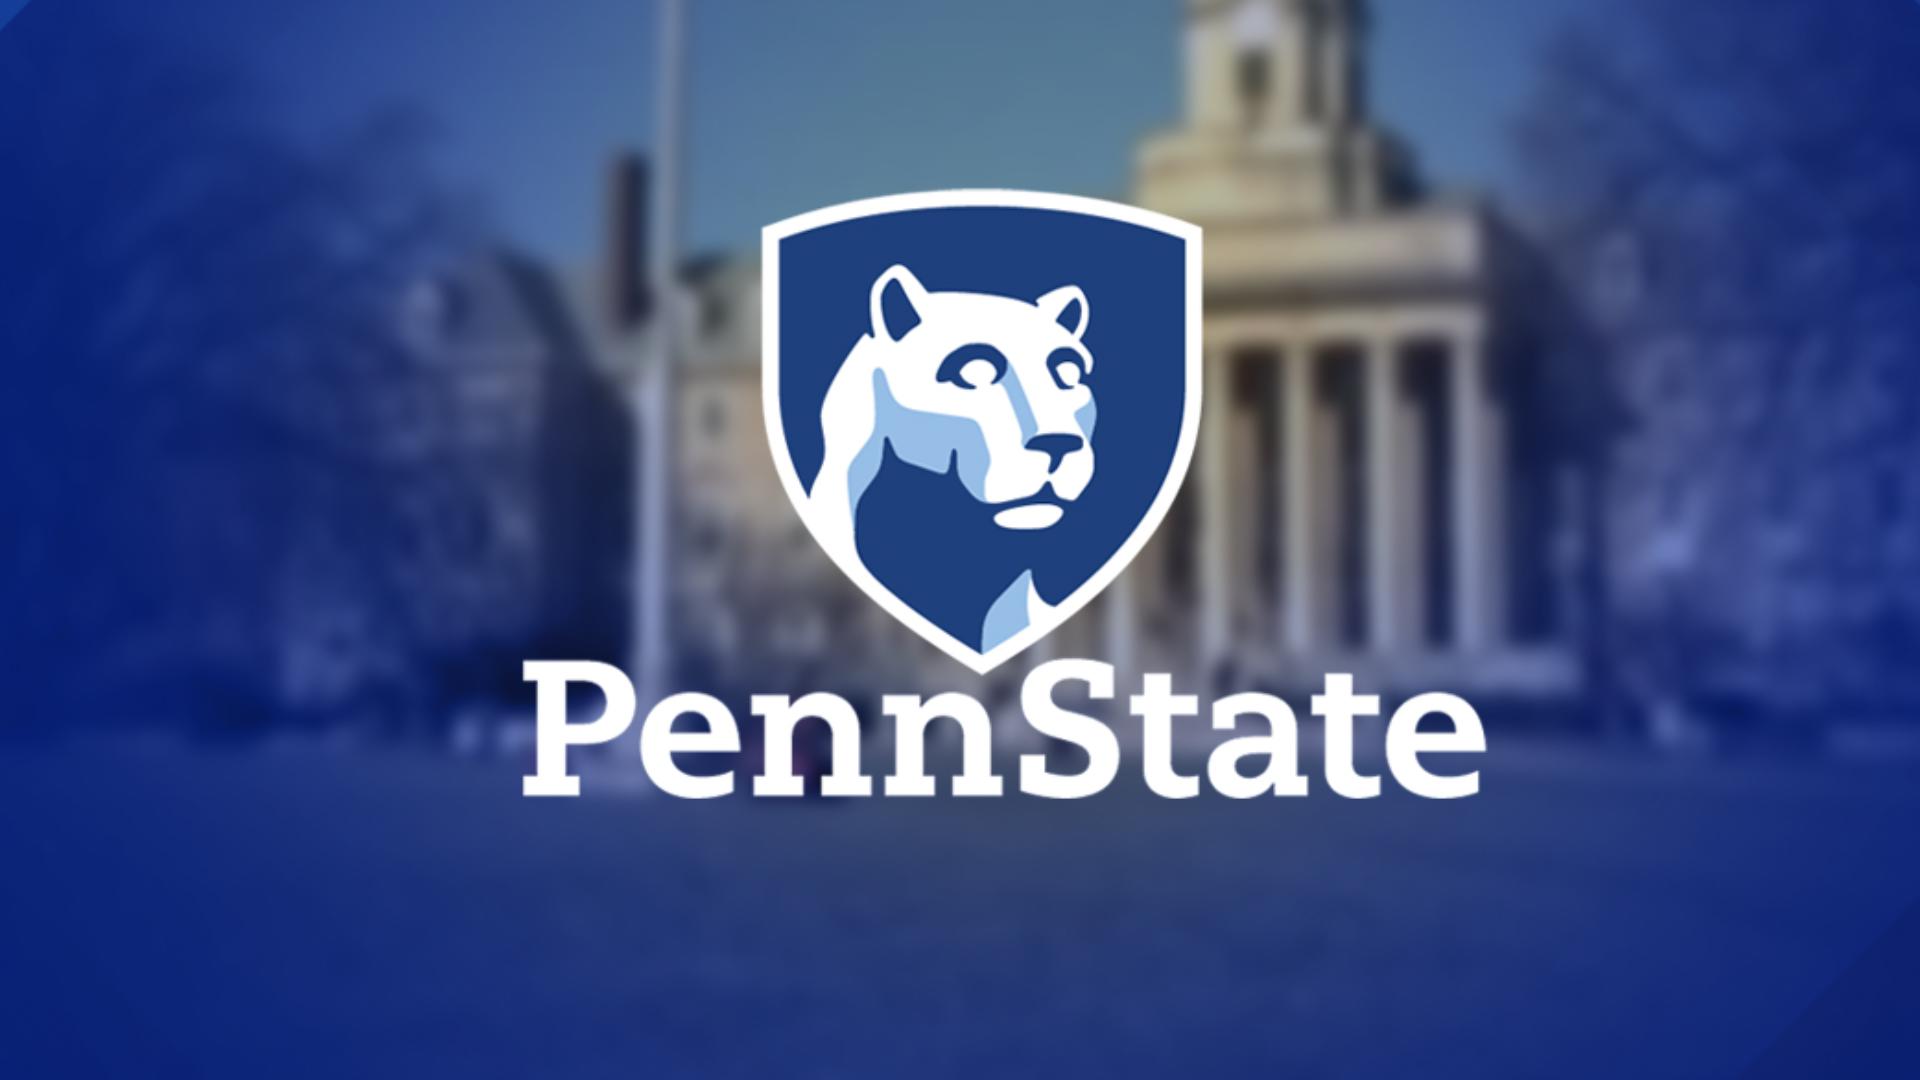 PSU is offering the deals in an effort to combat declining enrollment.